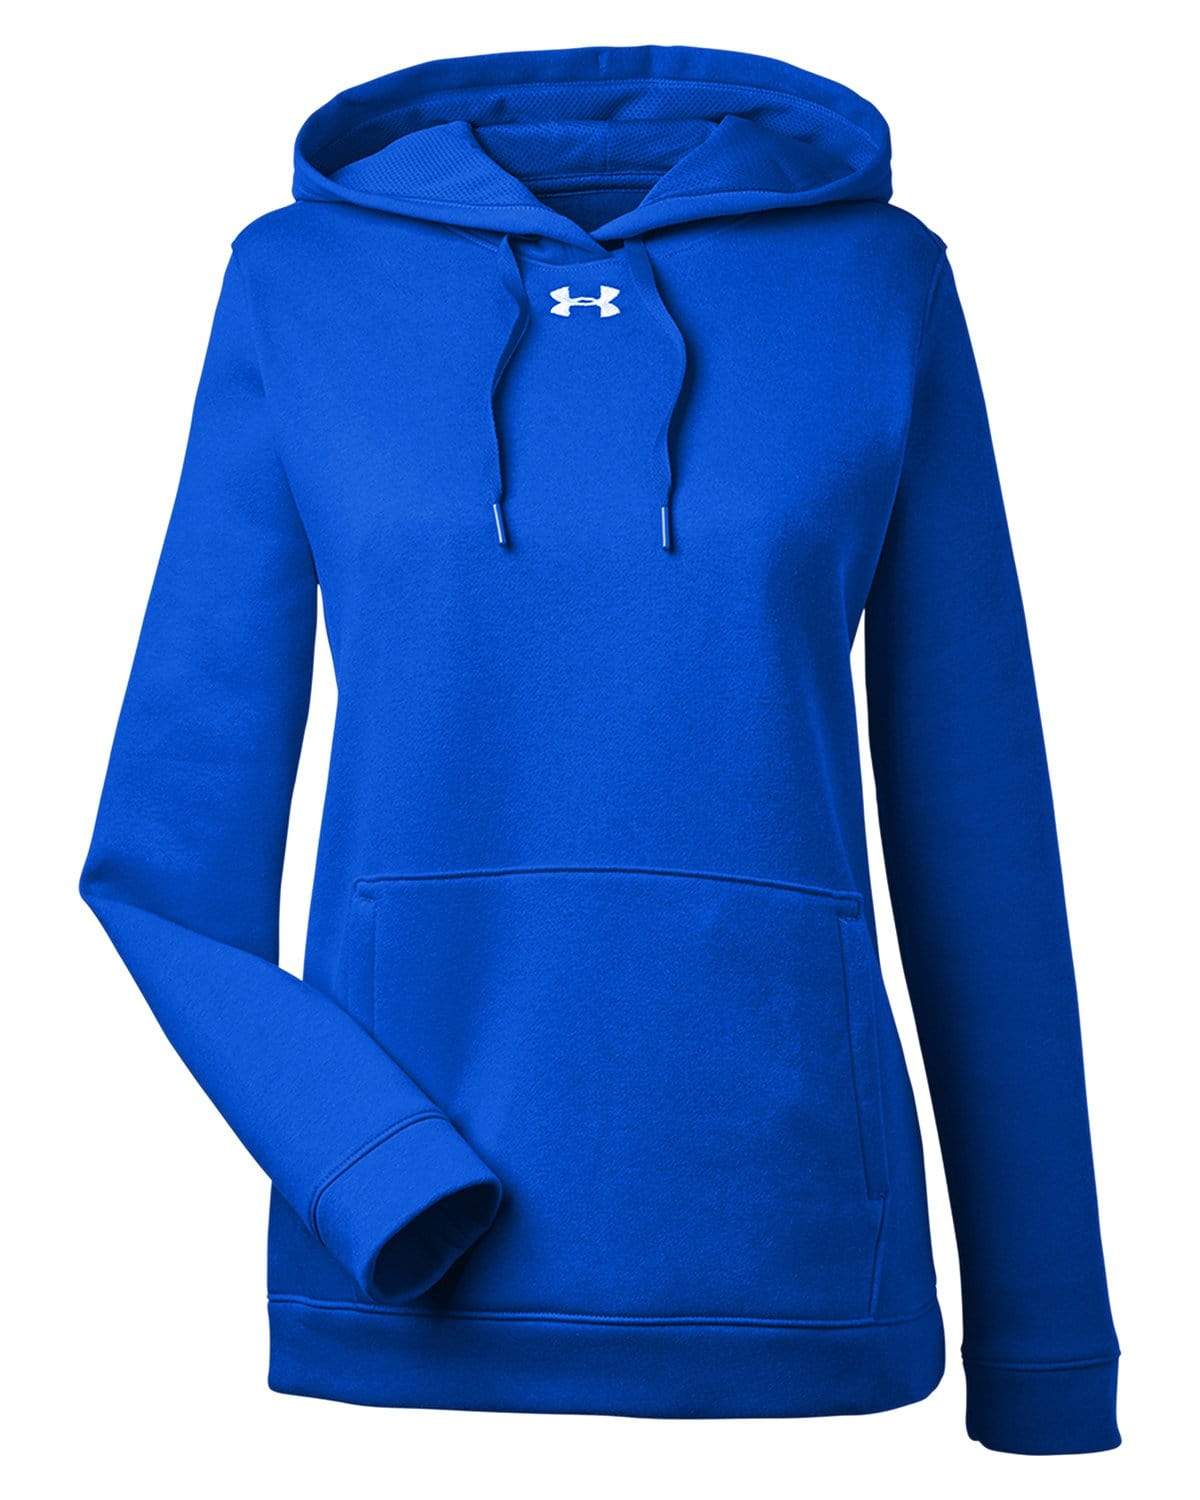 Under Armour Blue Sweatshirt With Hoodie. Logo On Chest. Size Women's S.  NWT.